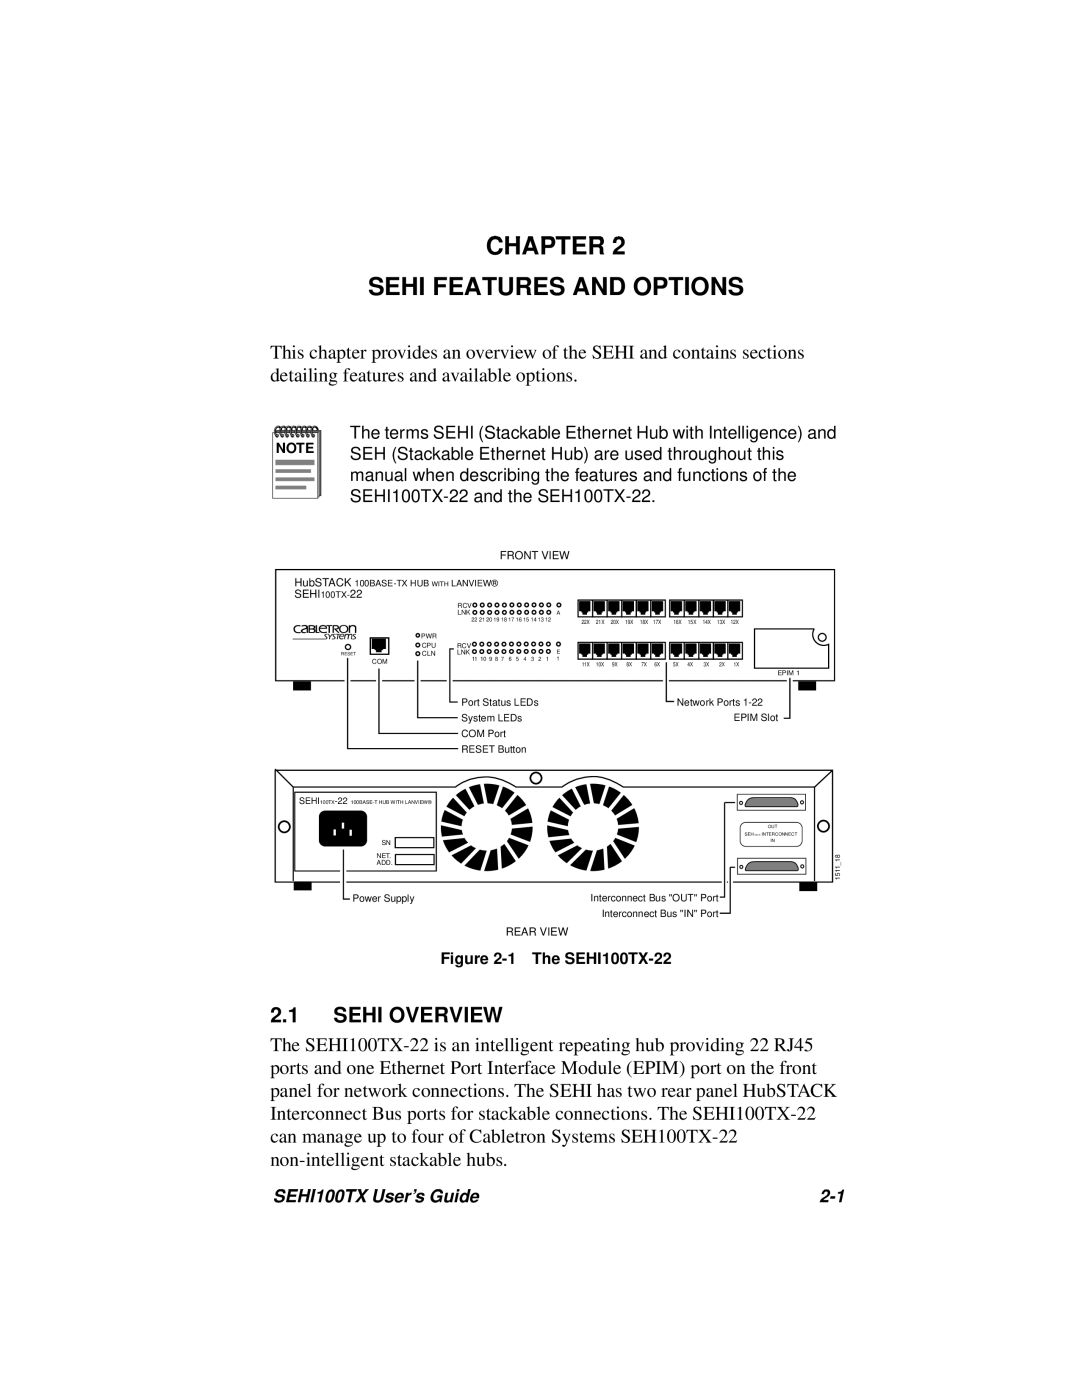 Cabletron Systems SEHI100TX-22 manual Chapter Sehi Features And Options, Sehi Overview 